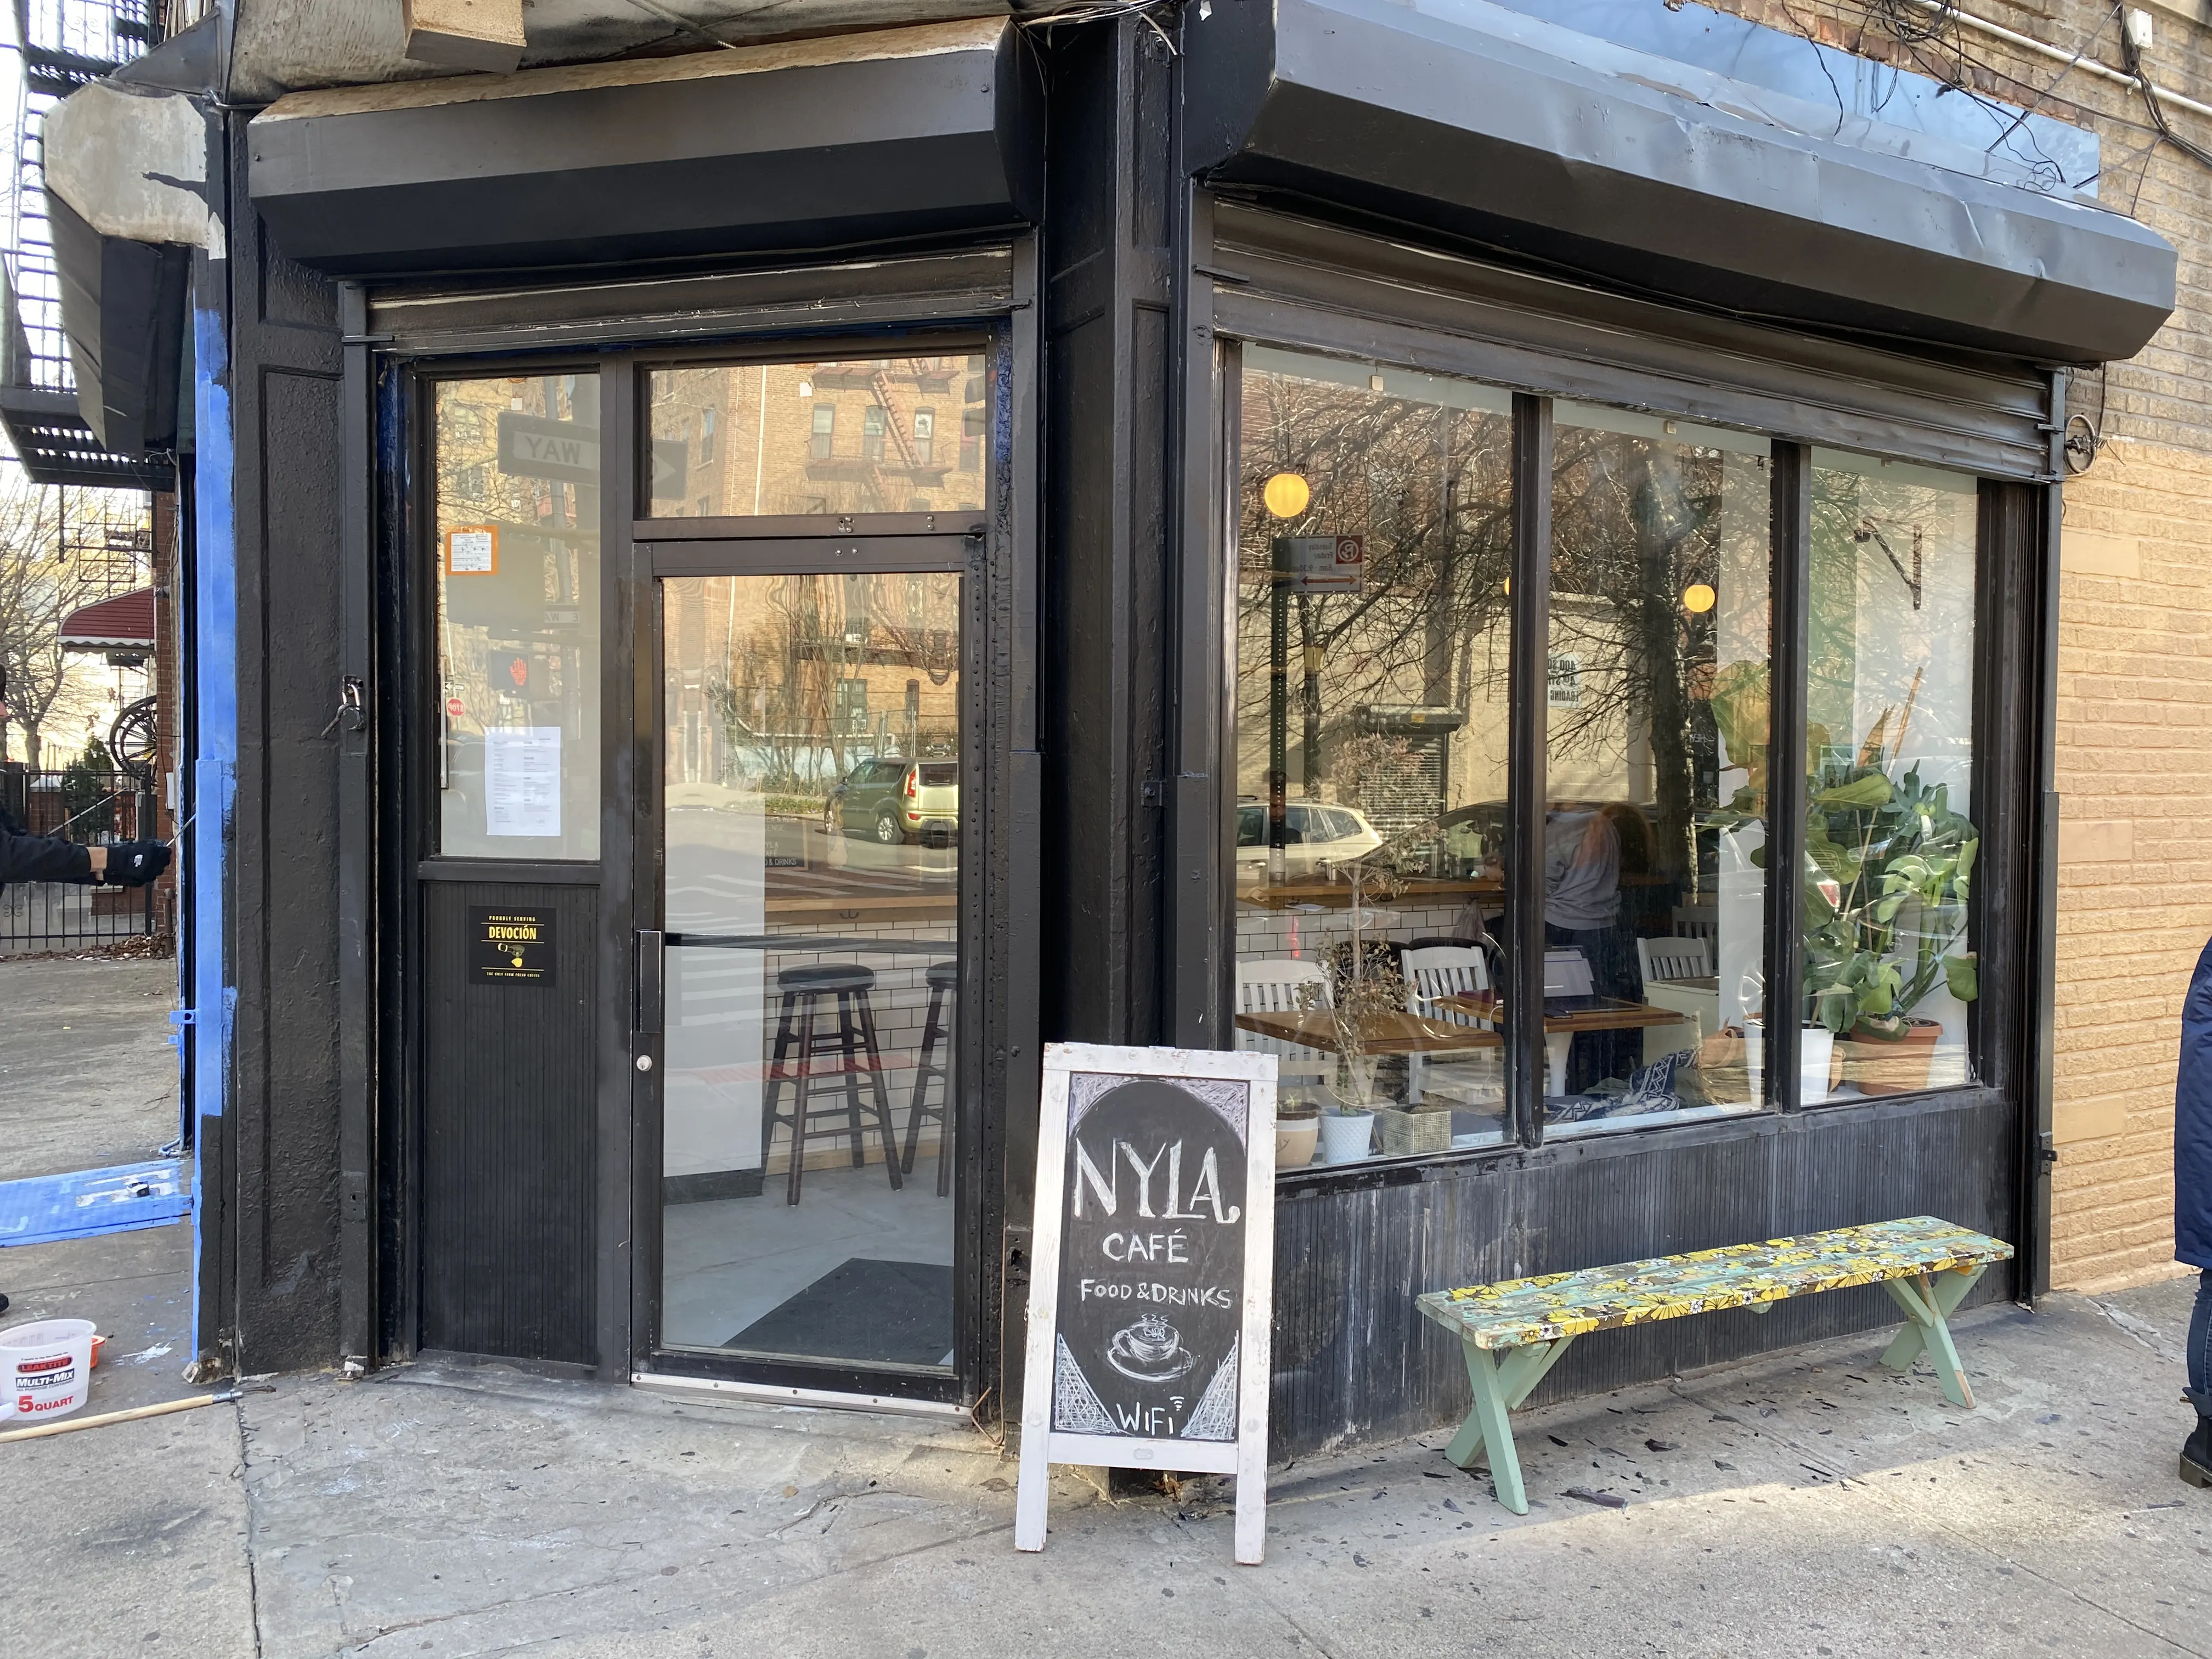 Nyla Cafe on Hewes and S 4th Street